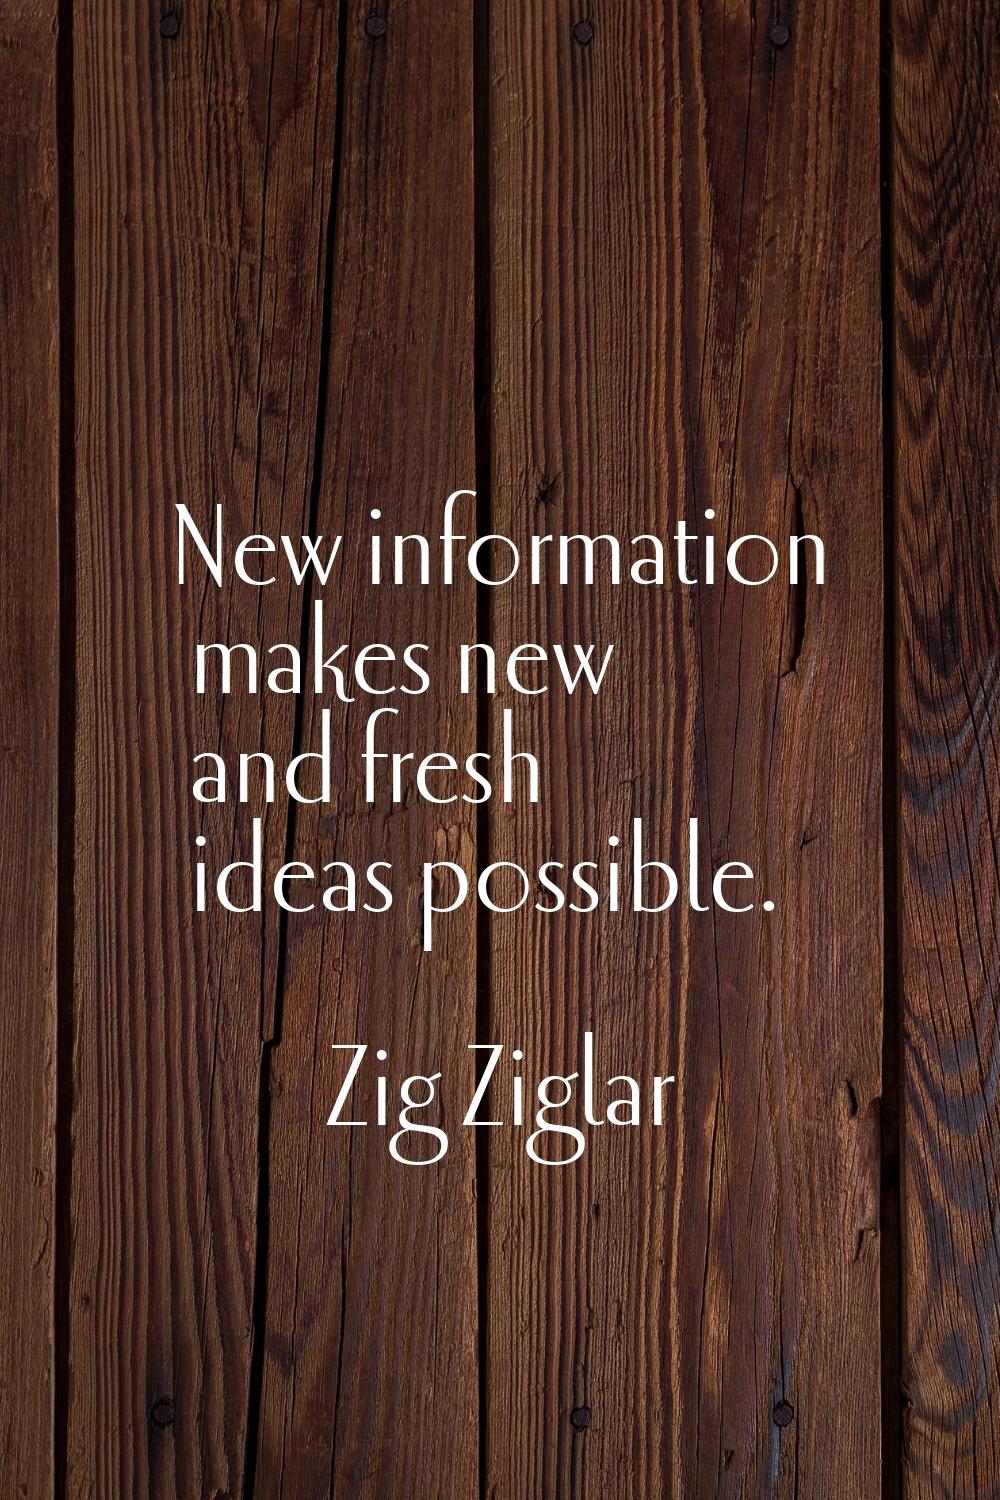 New information makes new and fresh ideas possible.